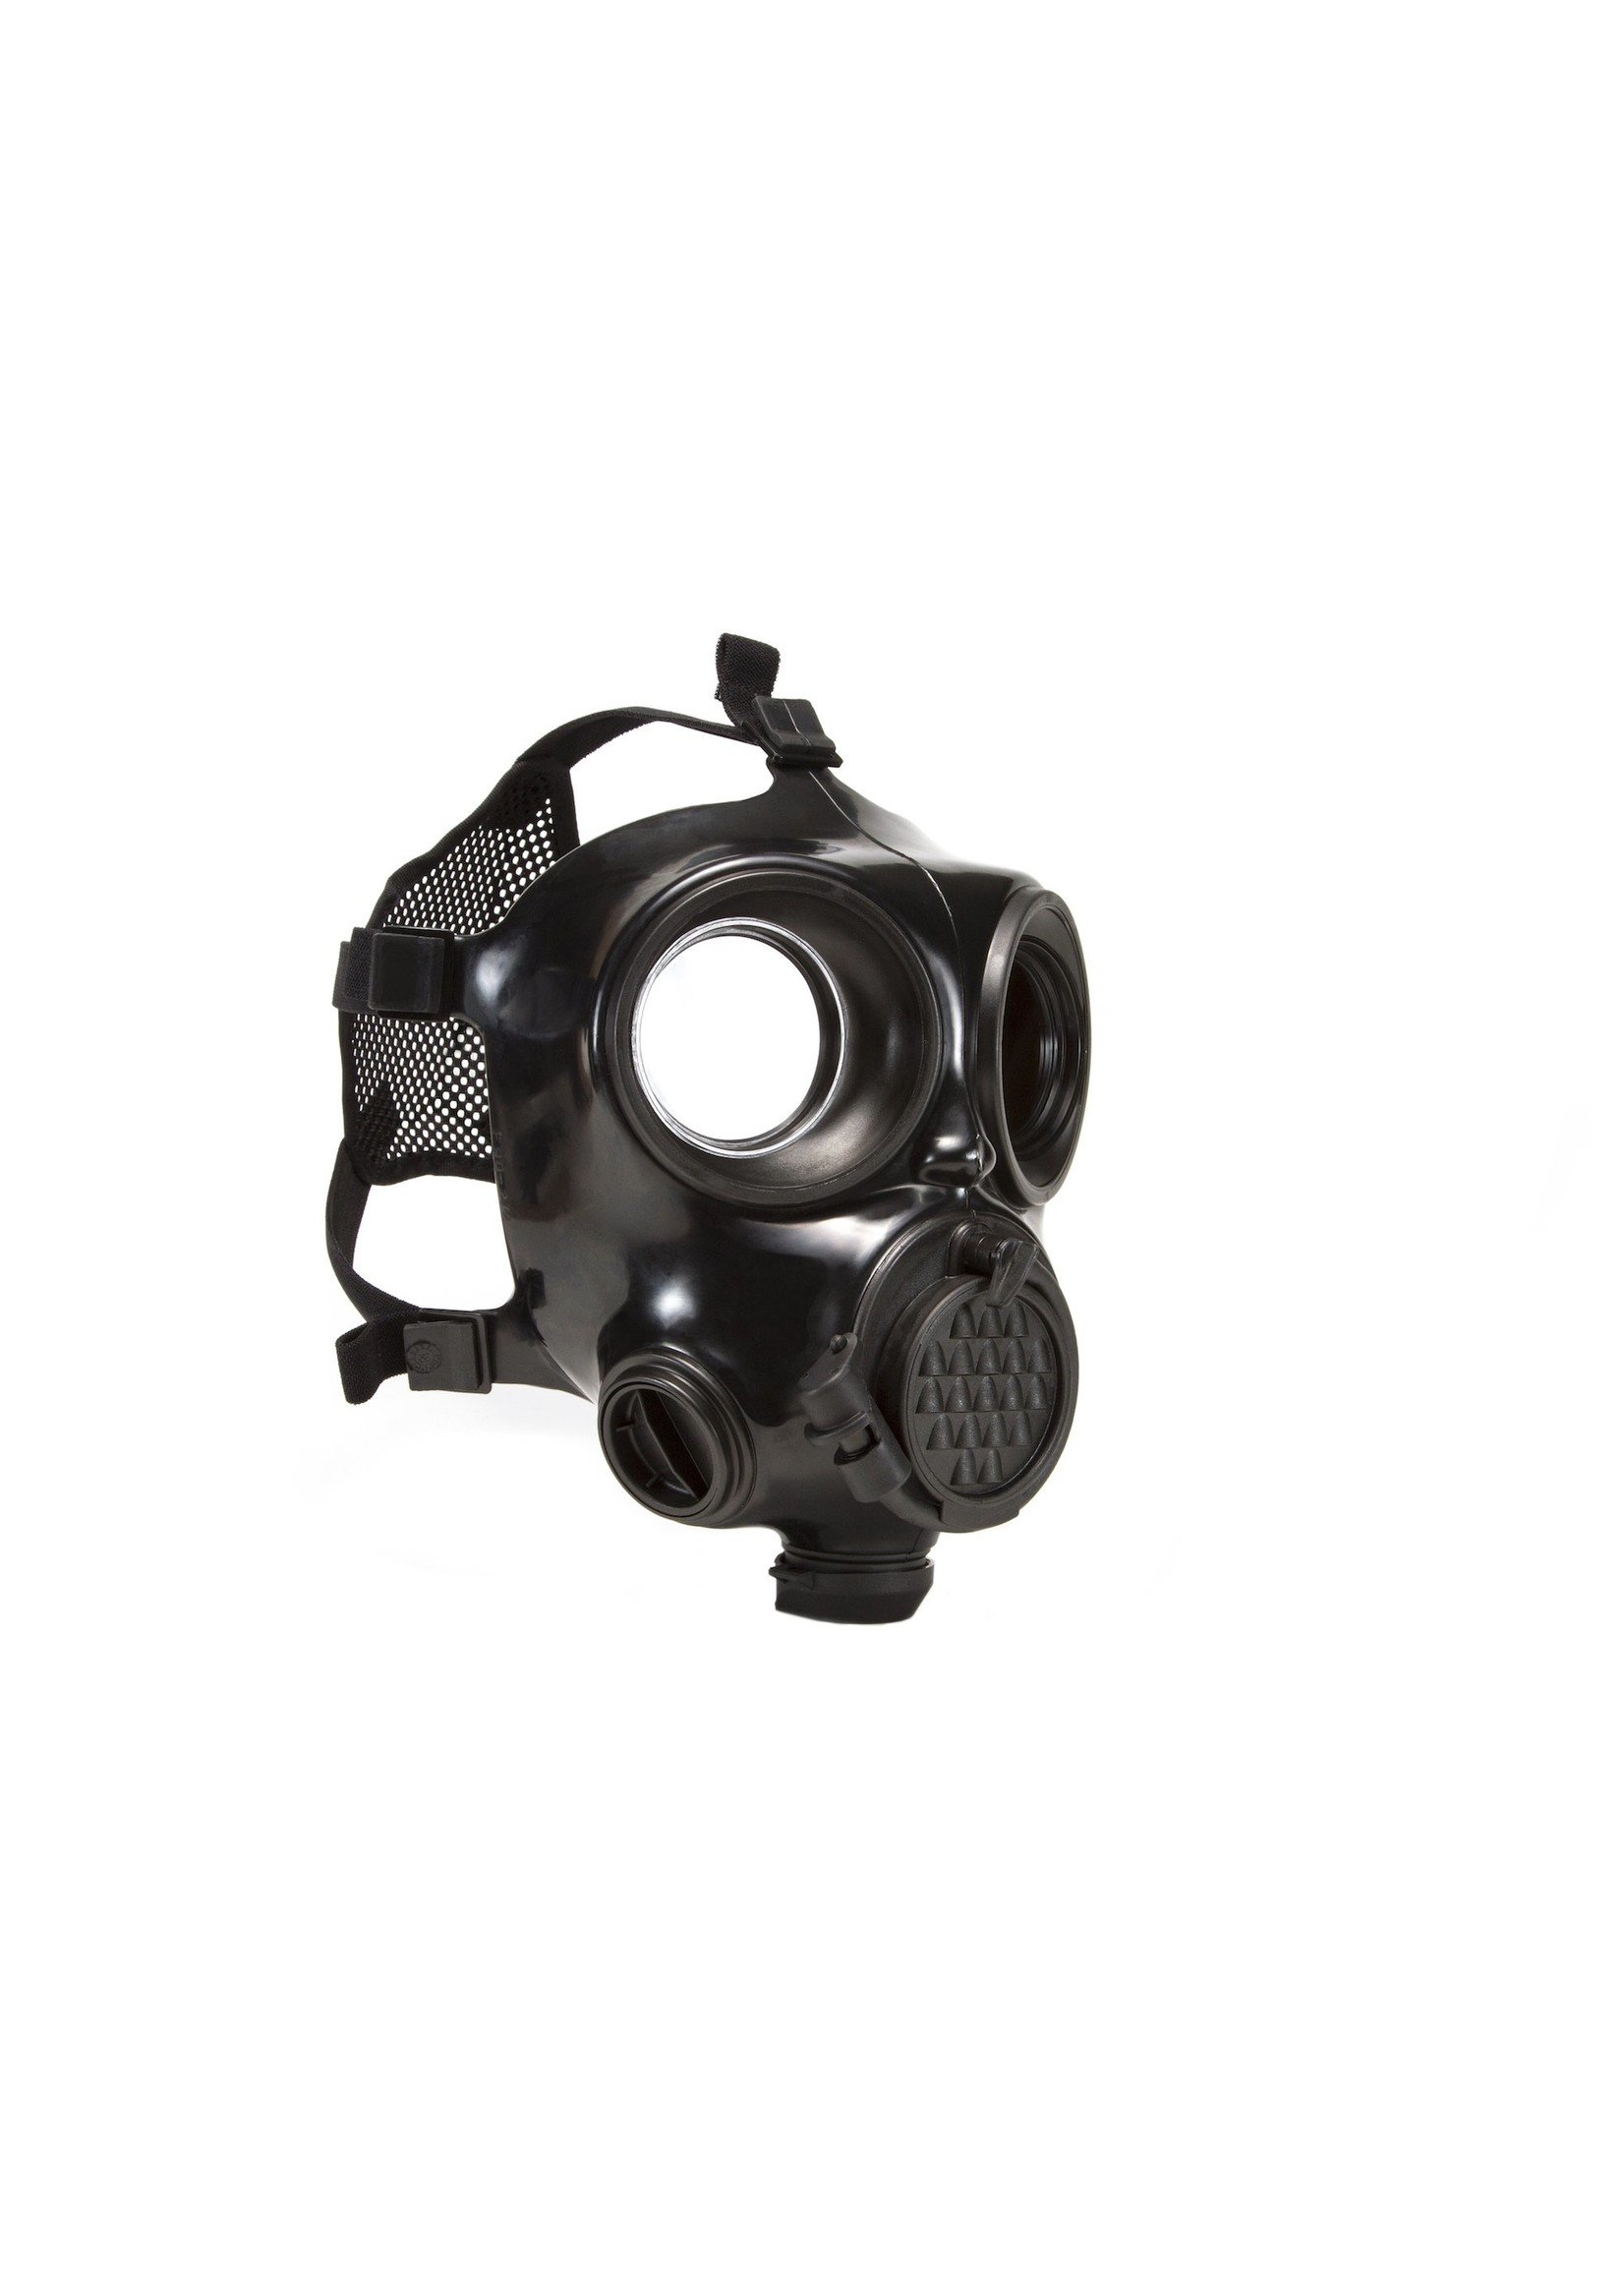 MIRA SAFETY CM-7M MILITARY GAS MASK - CBRN PROTECTION